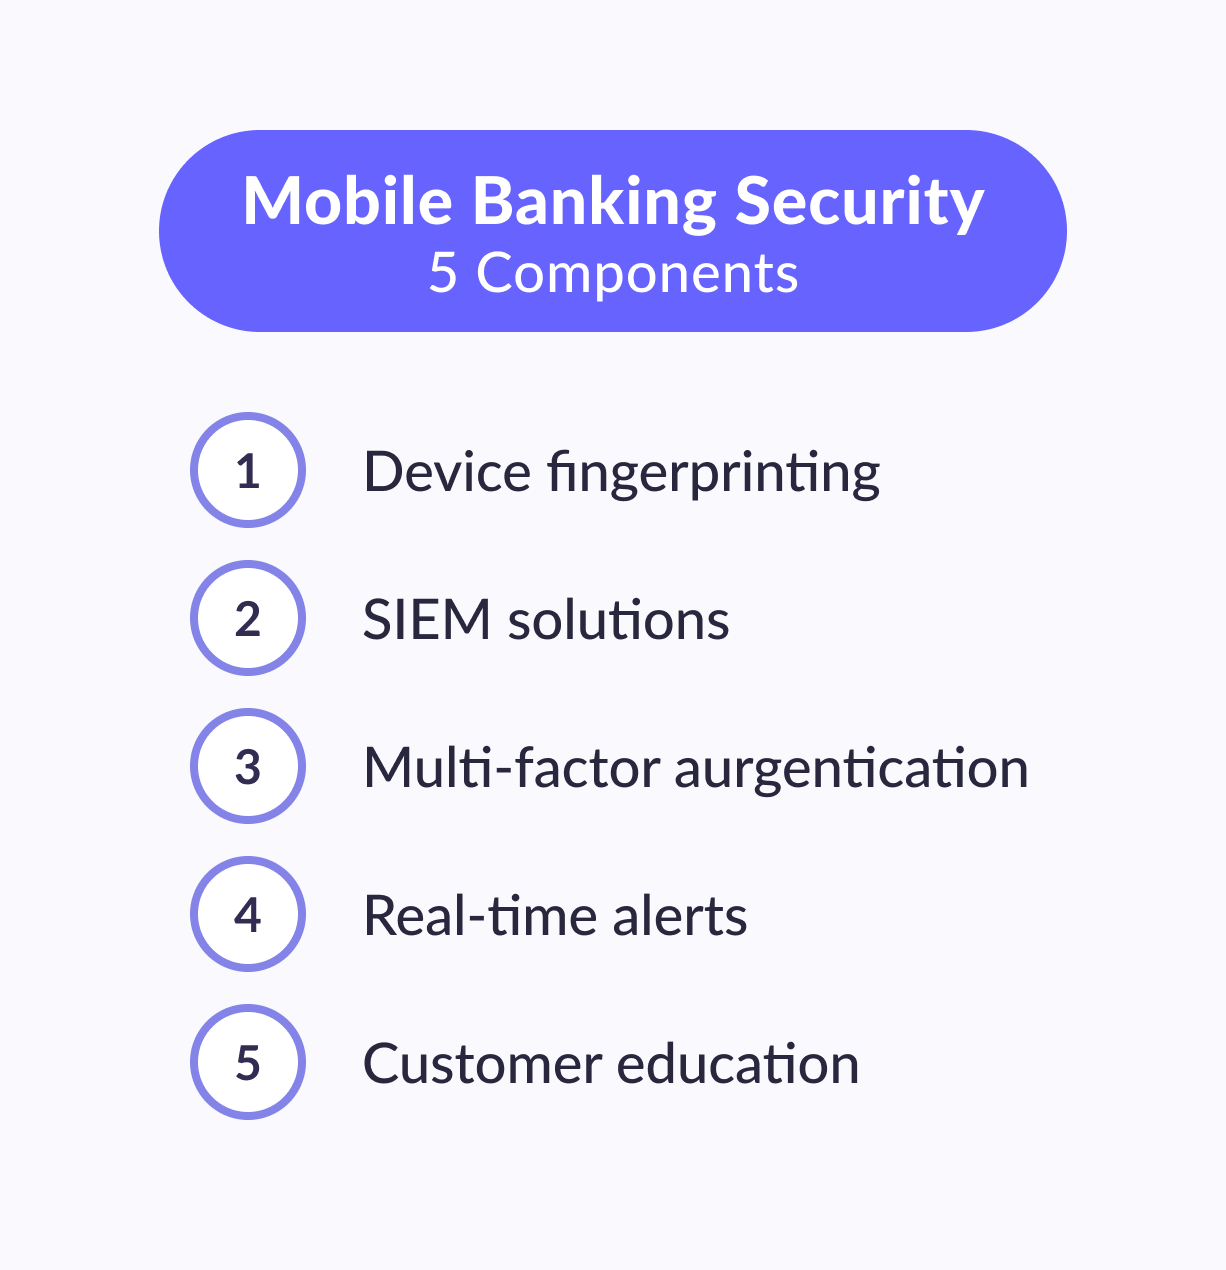 Security components of the mobile banking